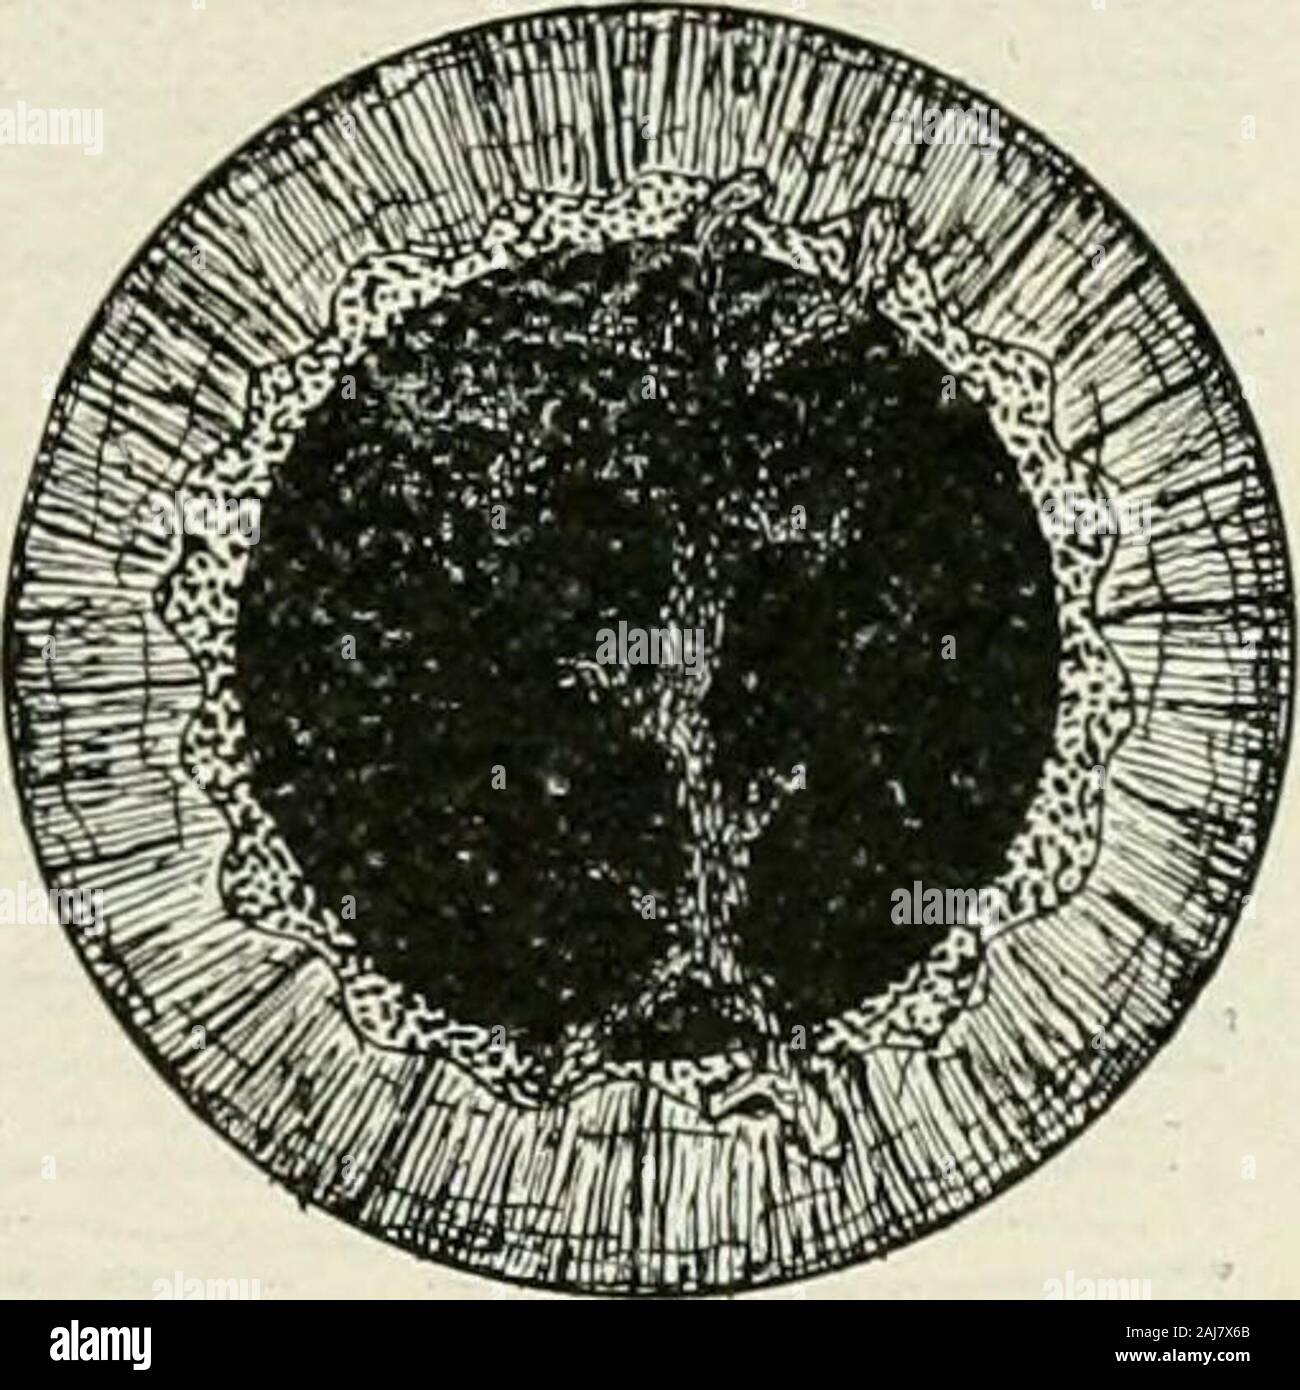 The commoner diseases of the eye : how to detect and how to treat them . Dendritic Ulcer of the Cornea. Herpetic Ulcer is the result of herpes zosterof the ophthalmic division of the fifth nerve,which is often seen with herpes of the face, lipsand nose. Small vesicles occasionally form on thecornea; these, breaking down, are infected andeventually produce ulceration. The disease isaccompanied by severe pain of a neuralgic char-acter. The resulting corneal opacities often in-terfere greatly with useful vision. Malarial Ulcer is sometimes seen in subjectssuffering from malaria. There is loss of Stock Photo